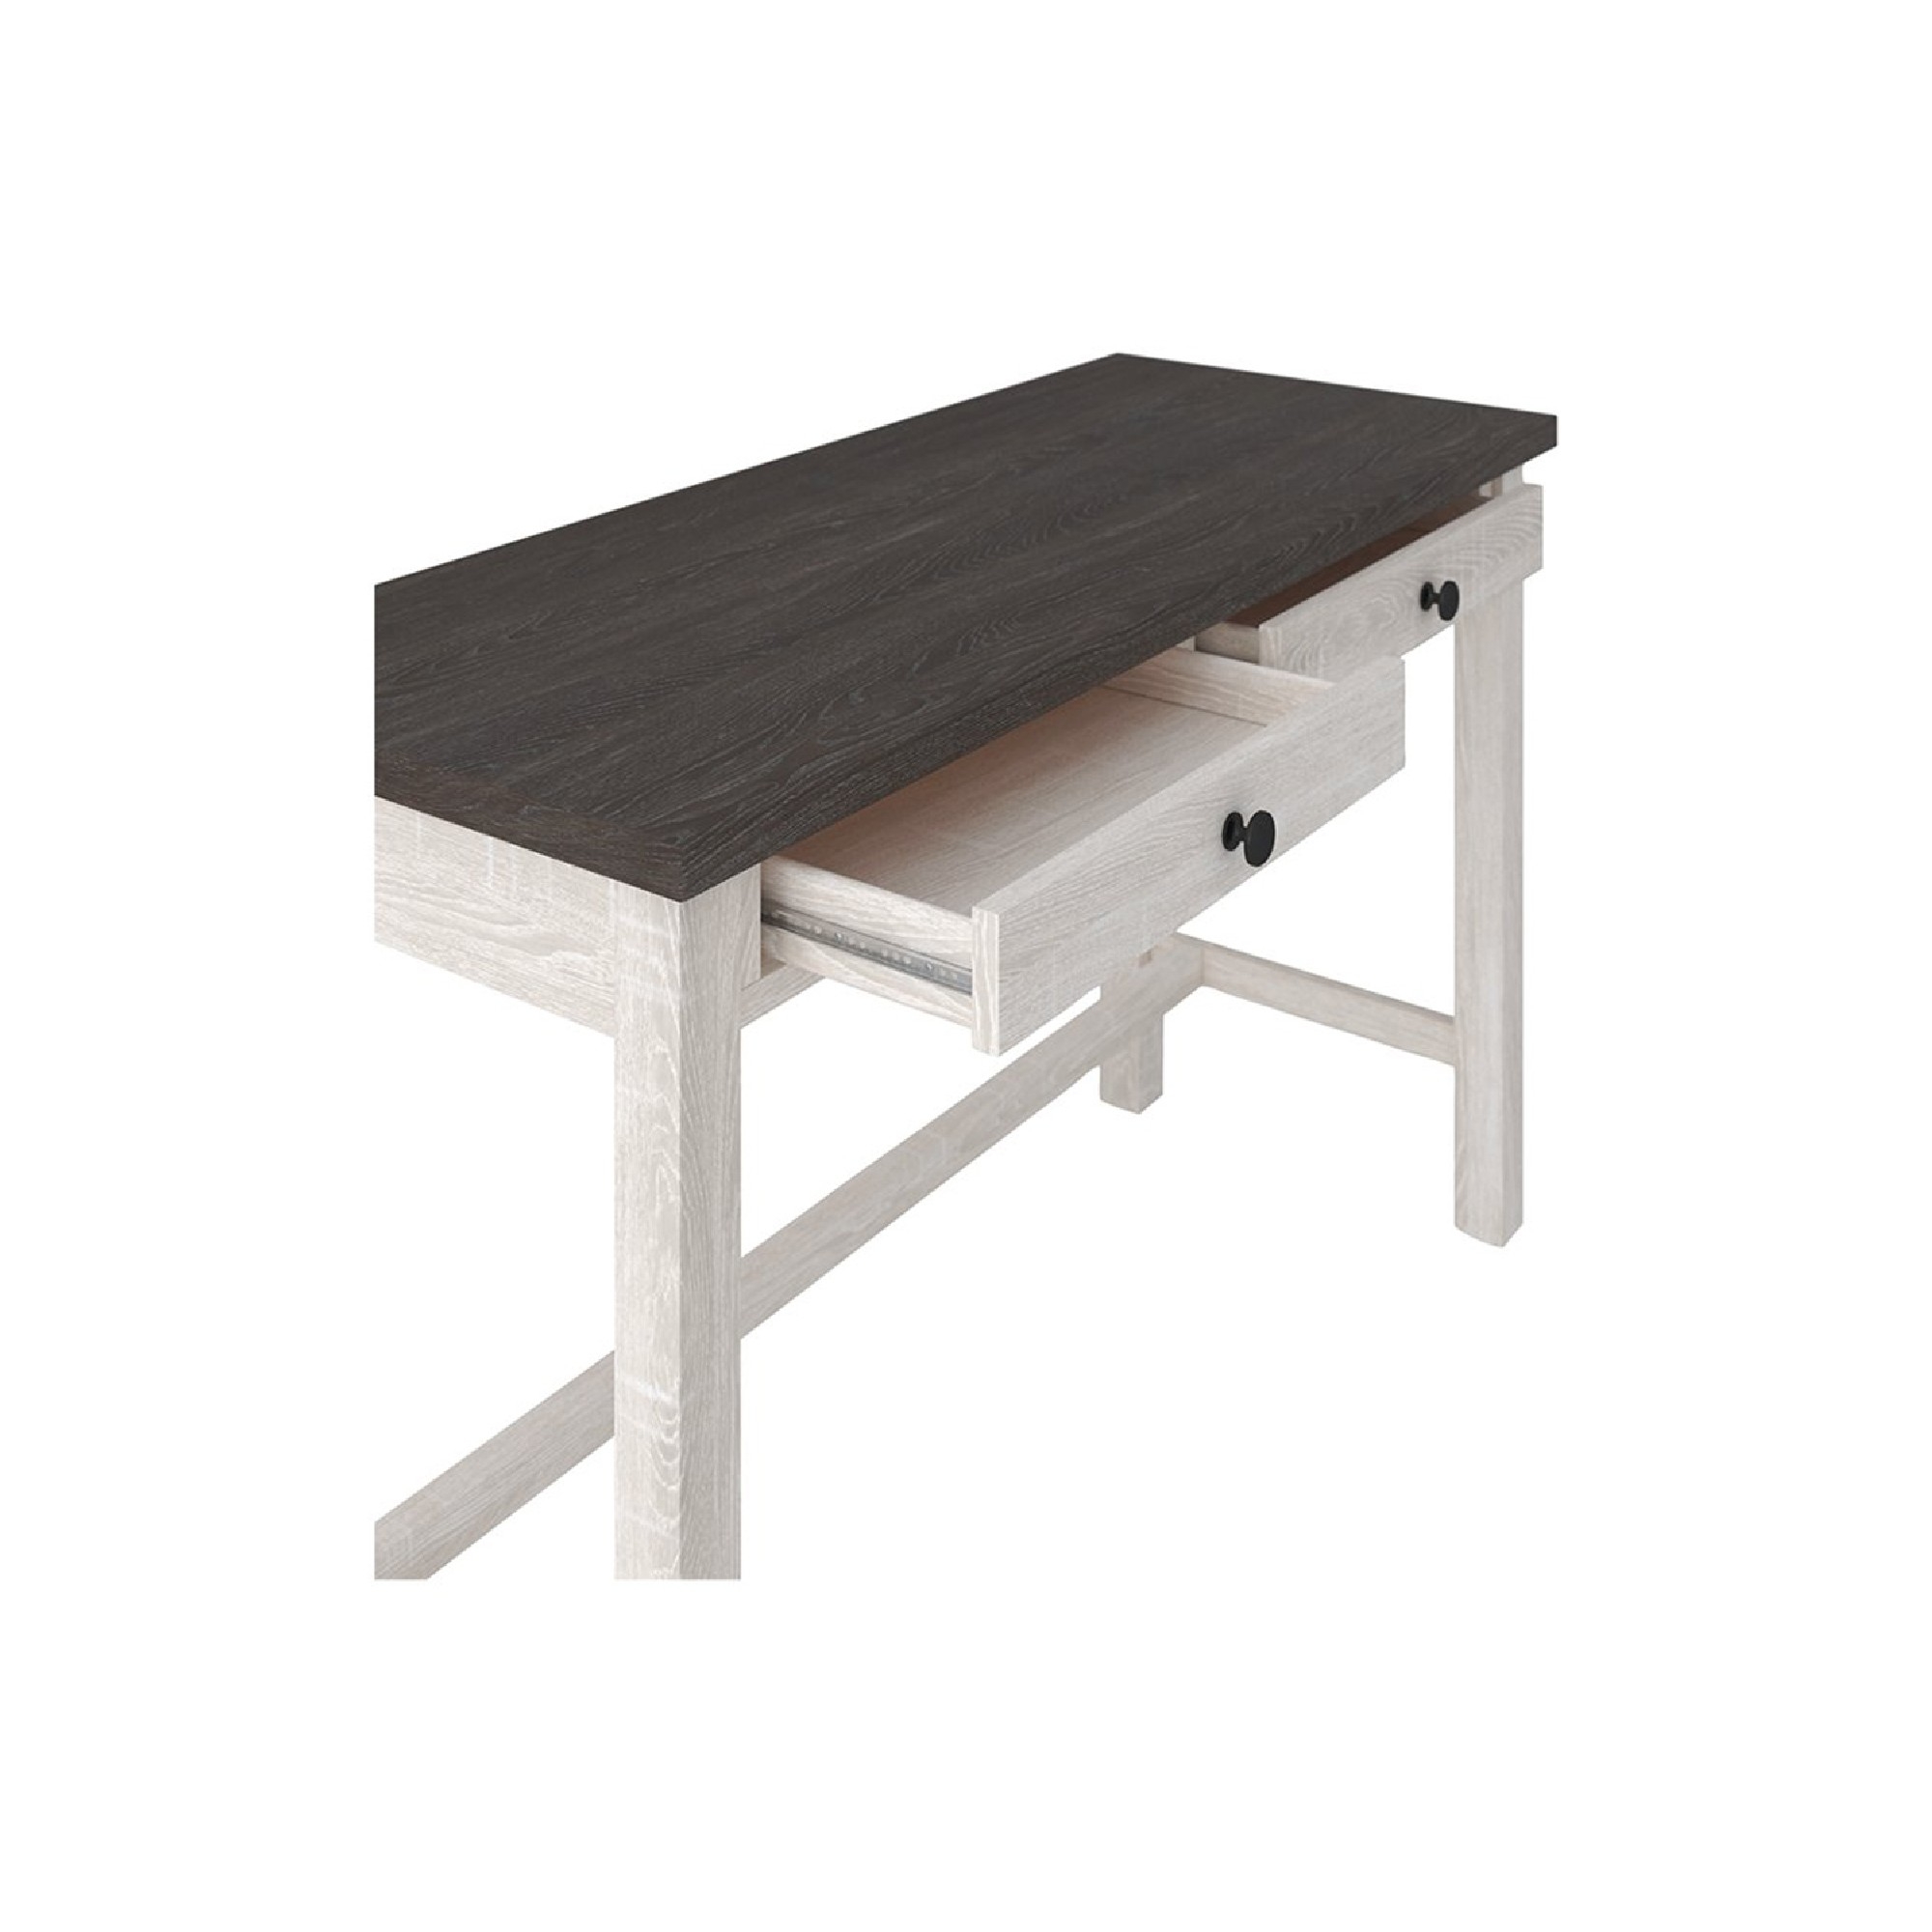 Wooden Writing Desk With Block Legs And 2 Storage Drawers, Gray And White- Saltoro Sherpi